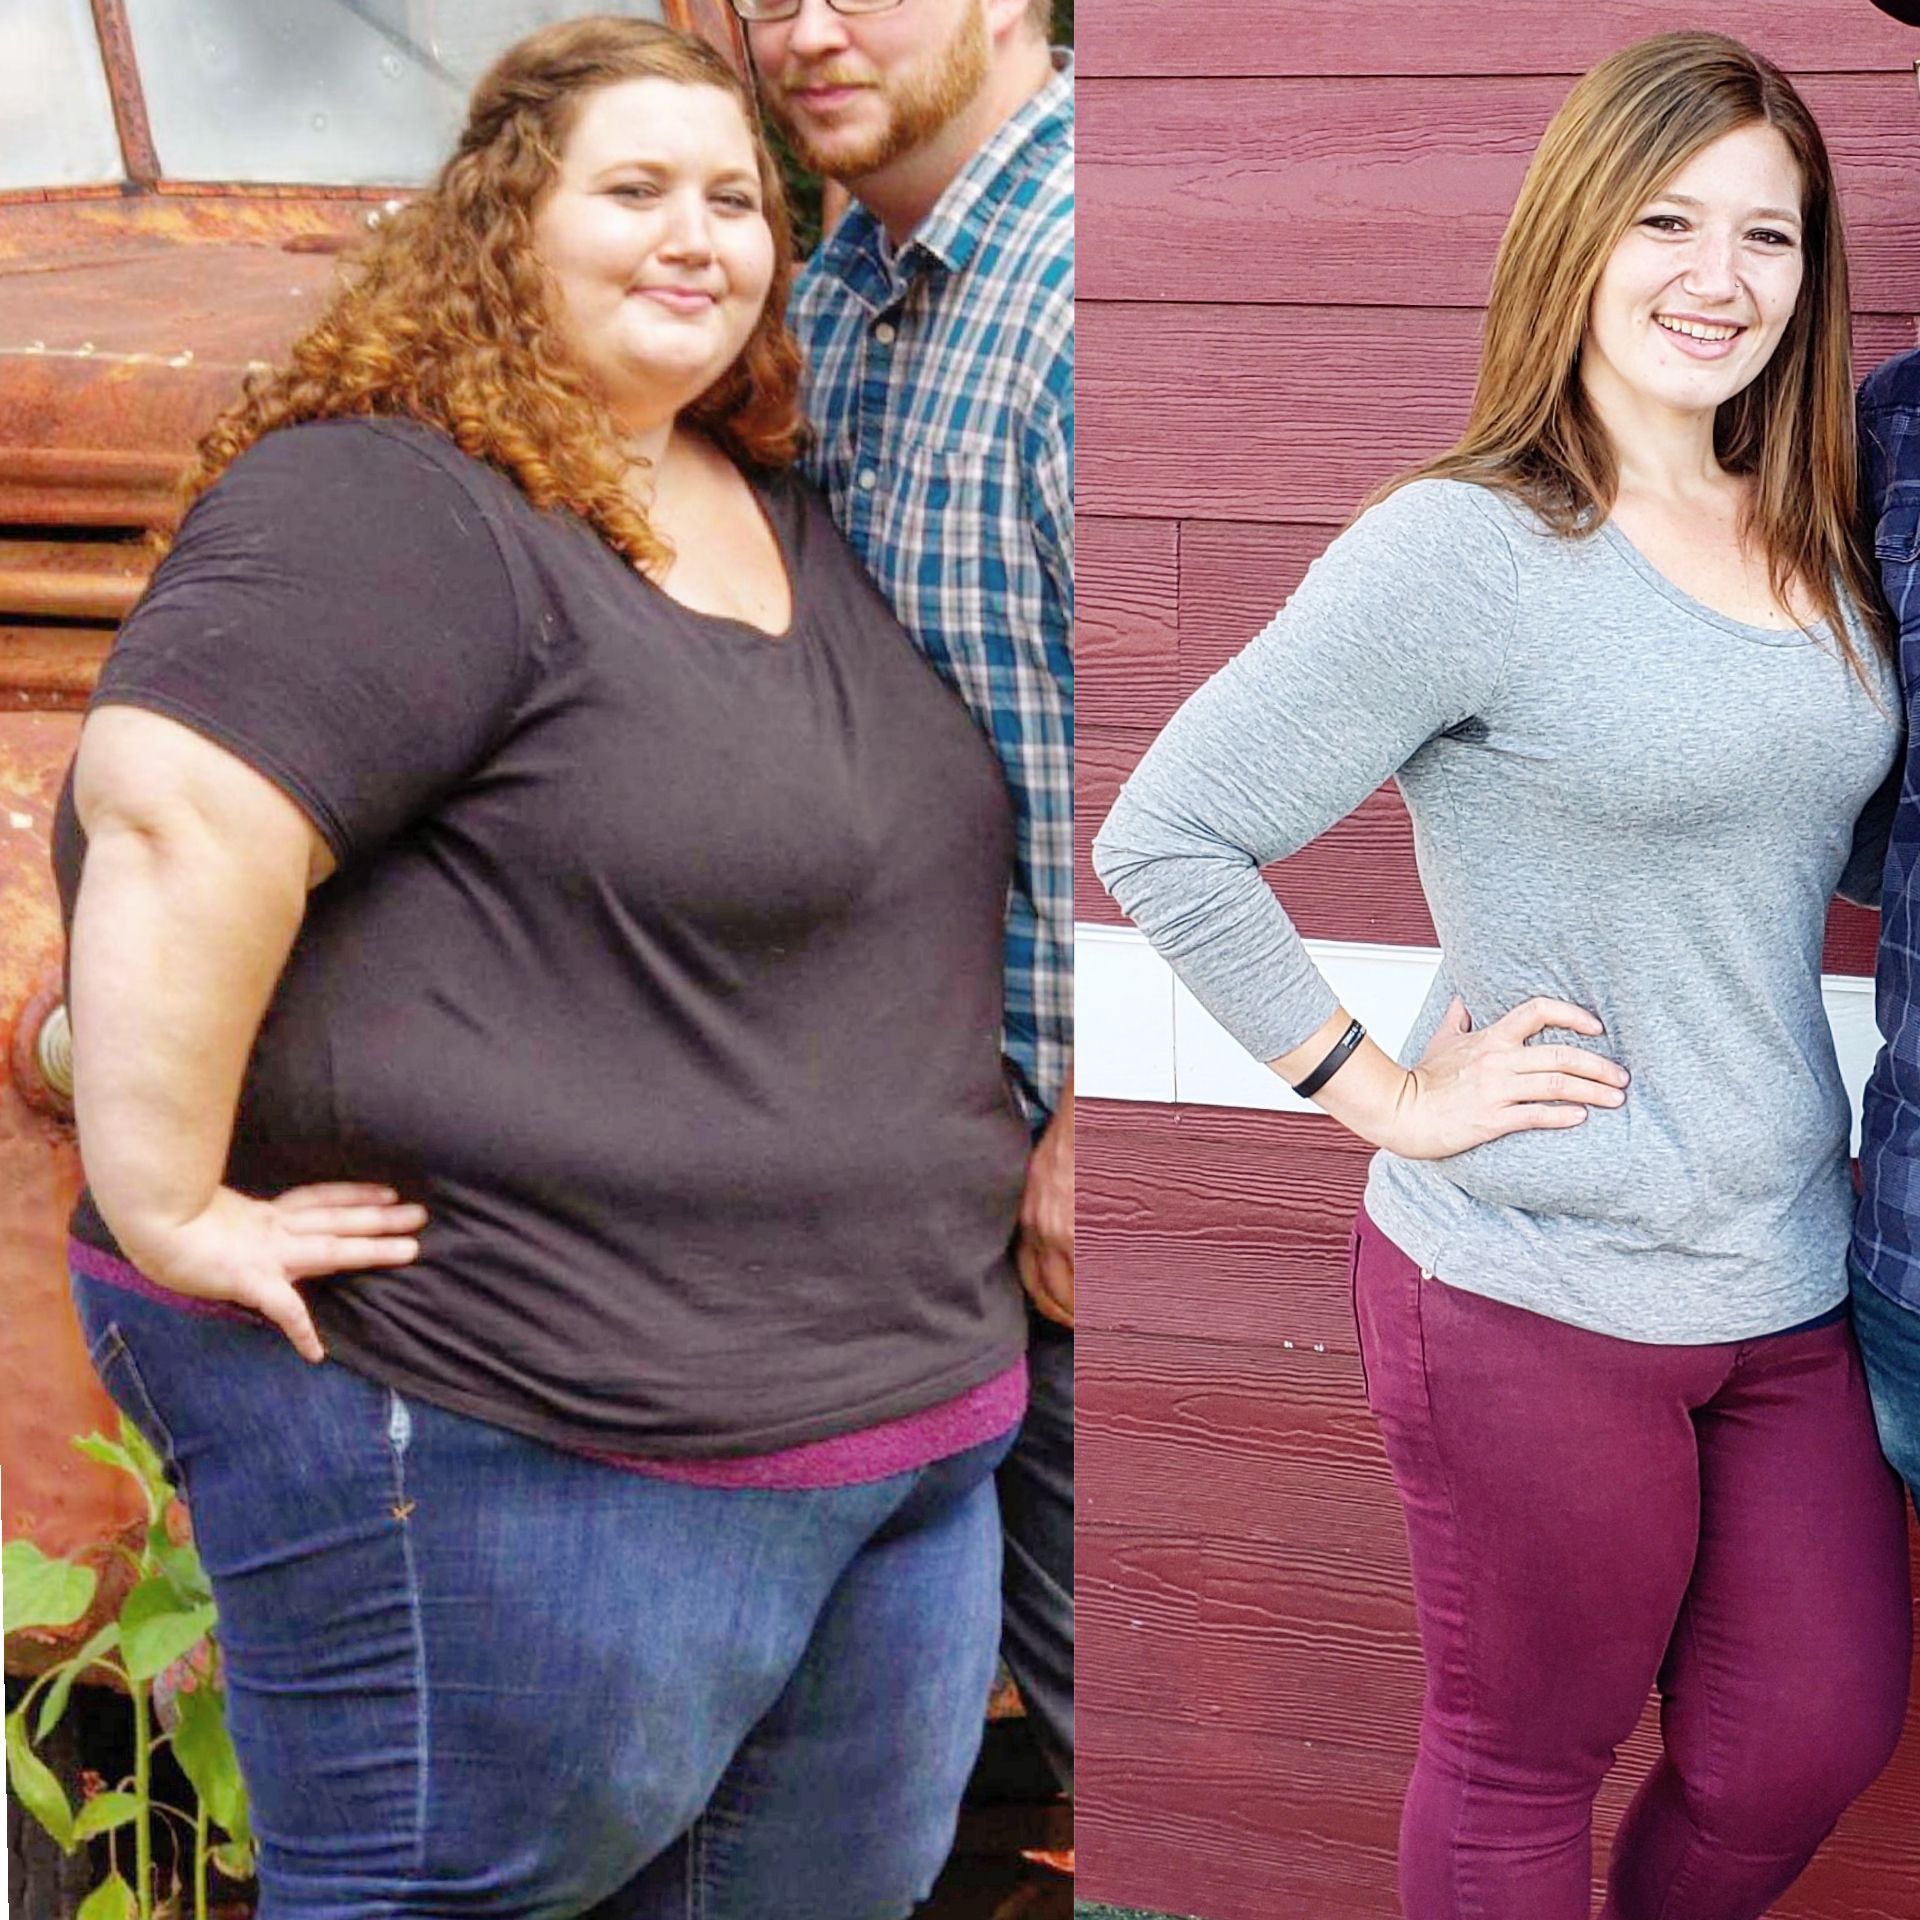 How Felicia Keathley Lost 143 Pounds on Weight Watchers